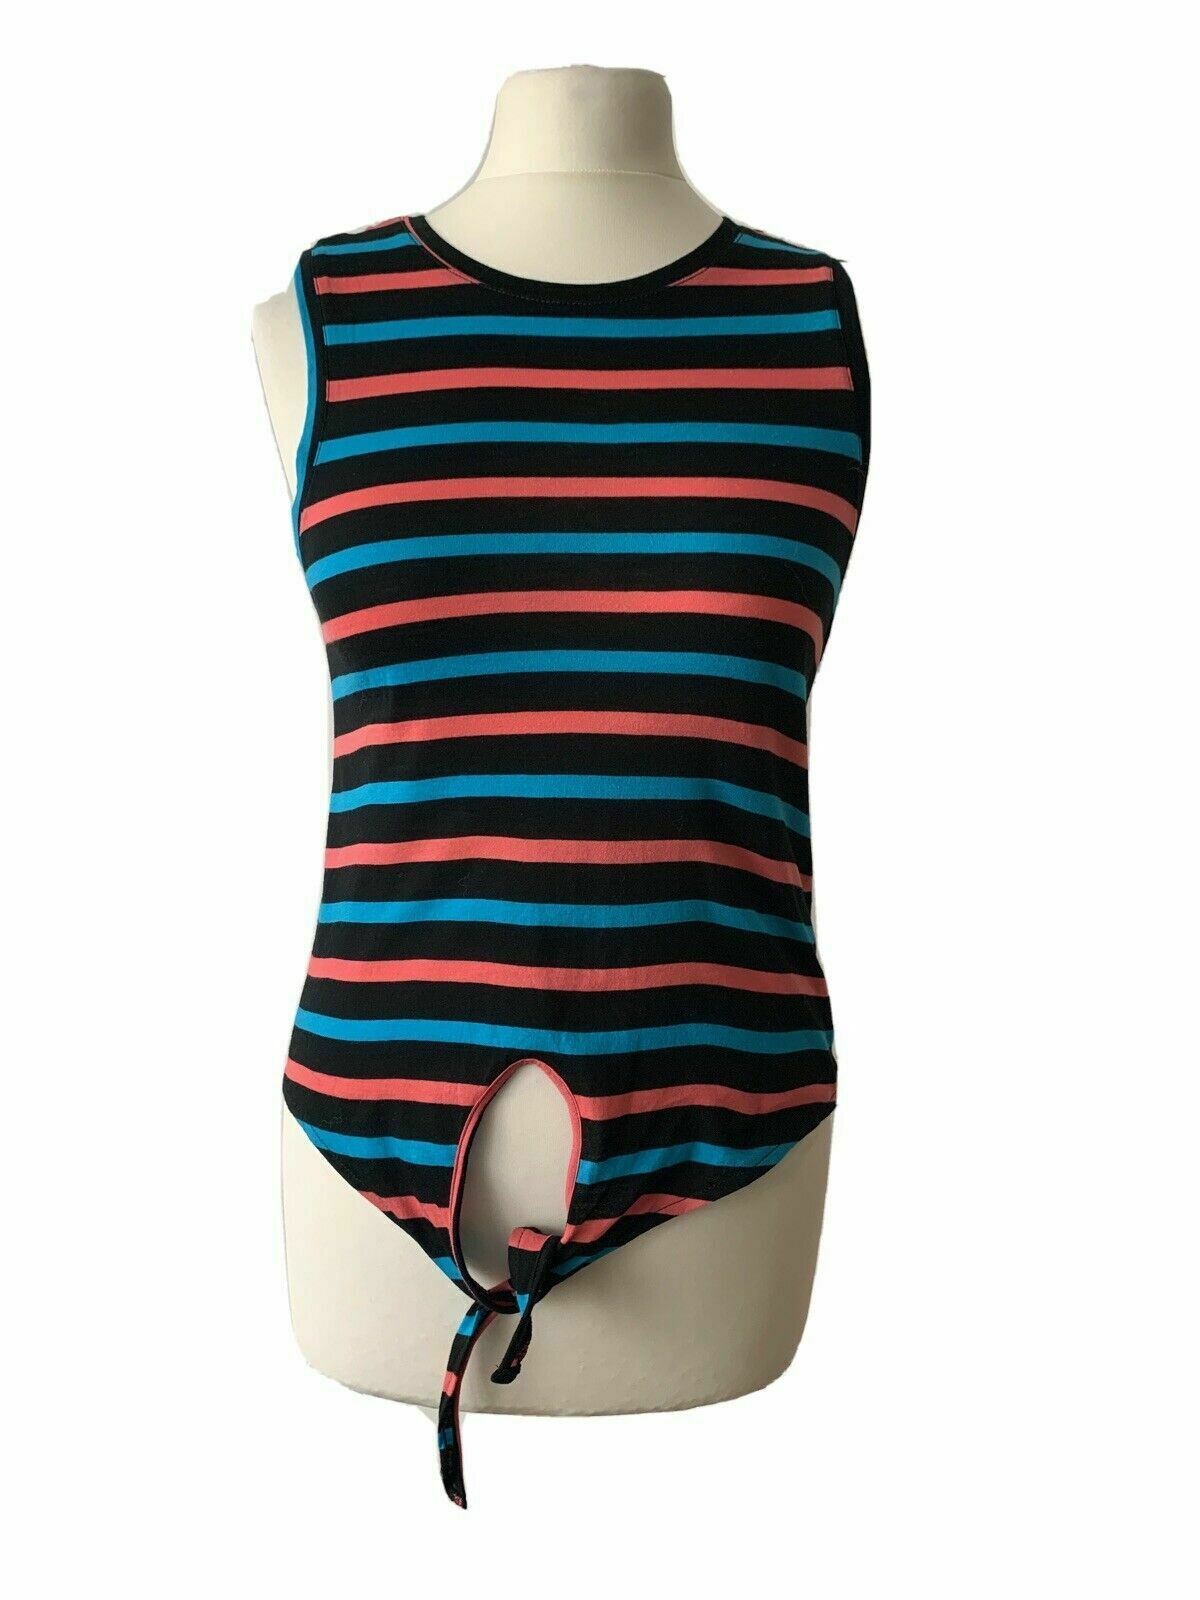 Topshop Sleeveless Tie Top Striped Size 8